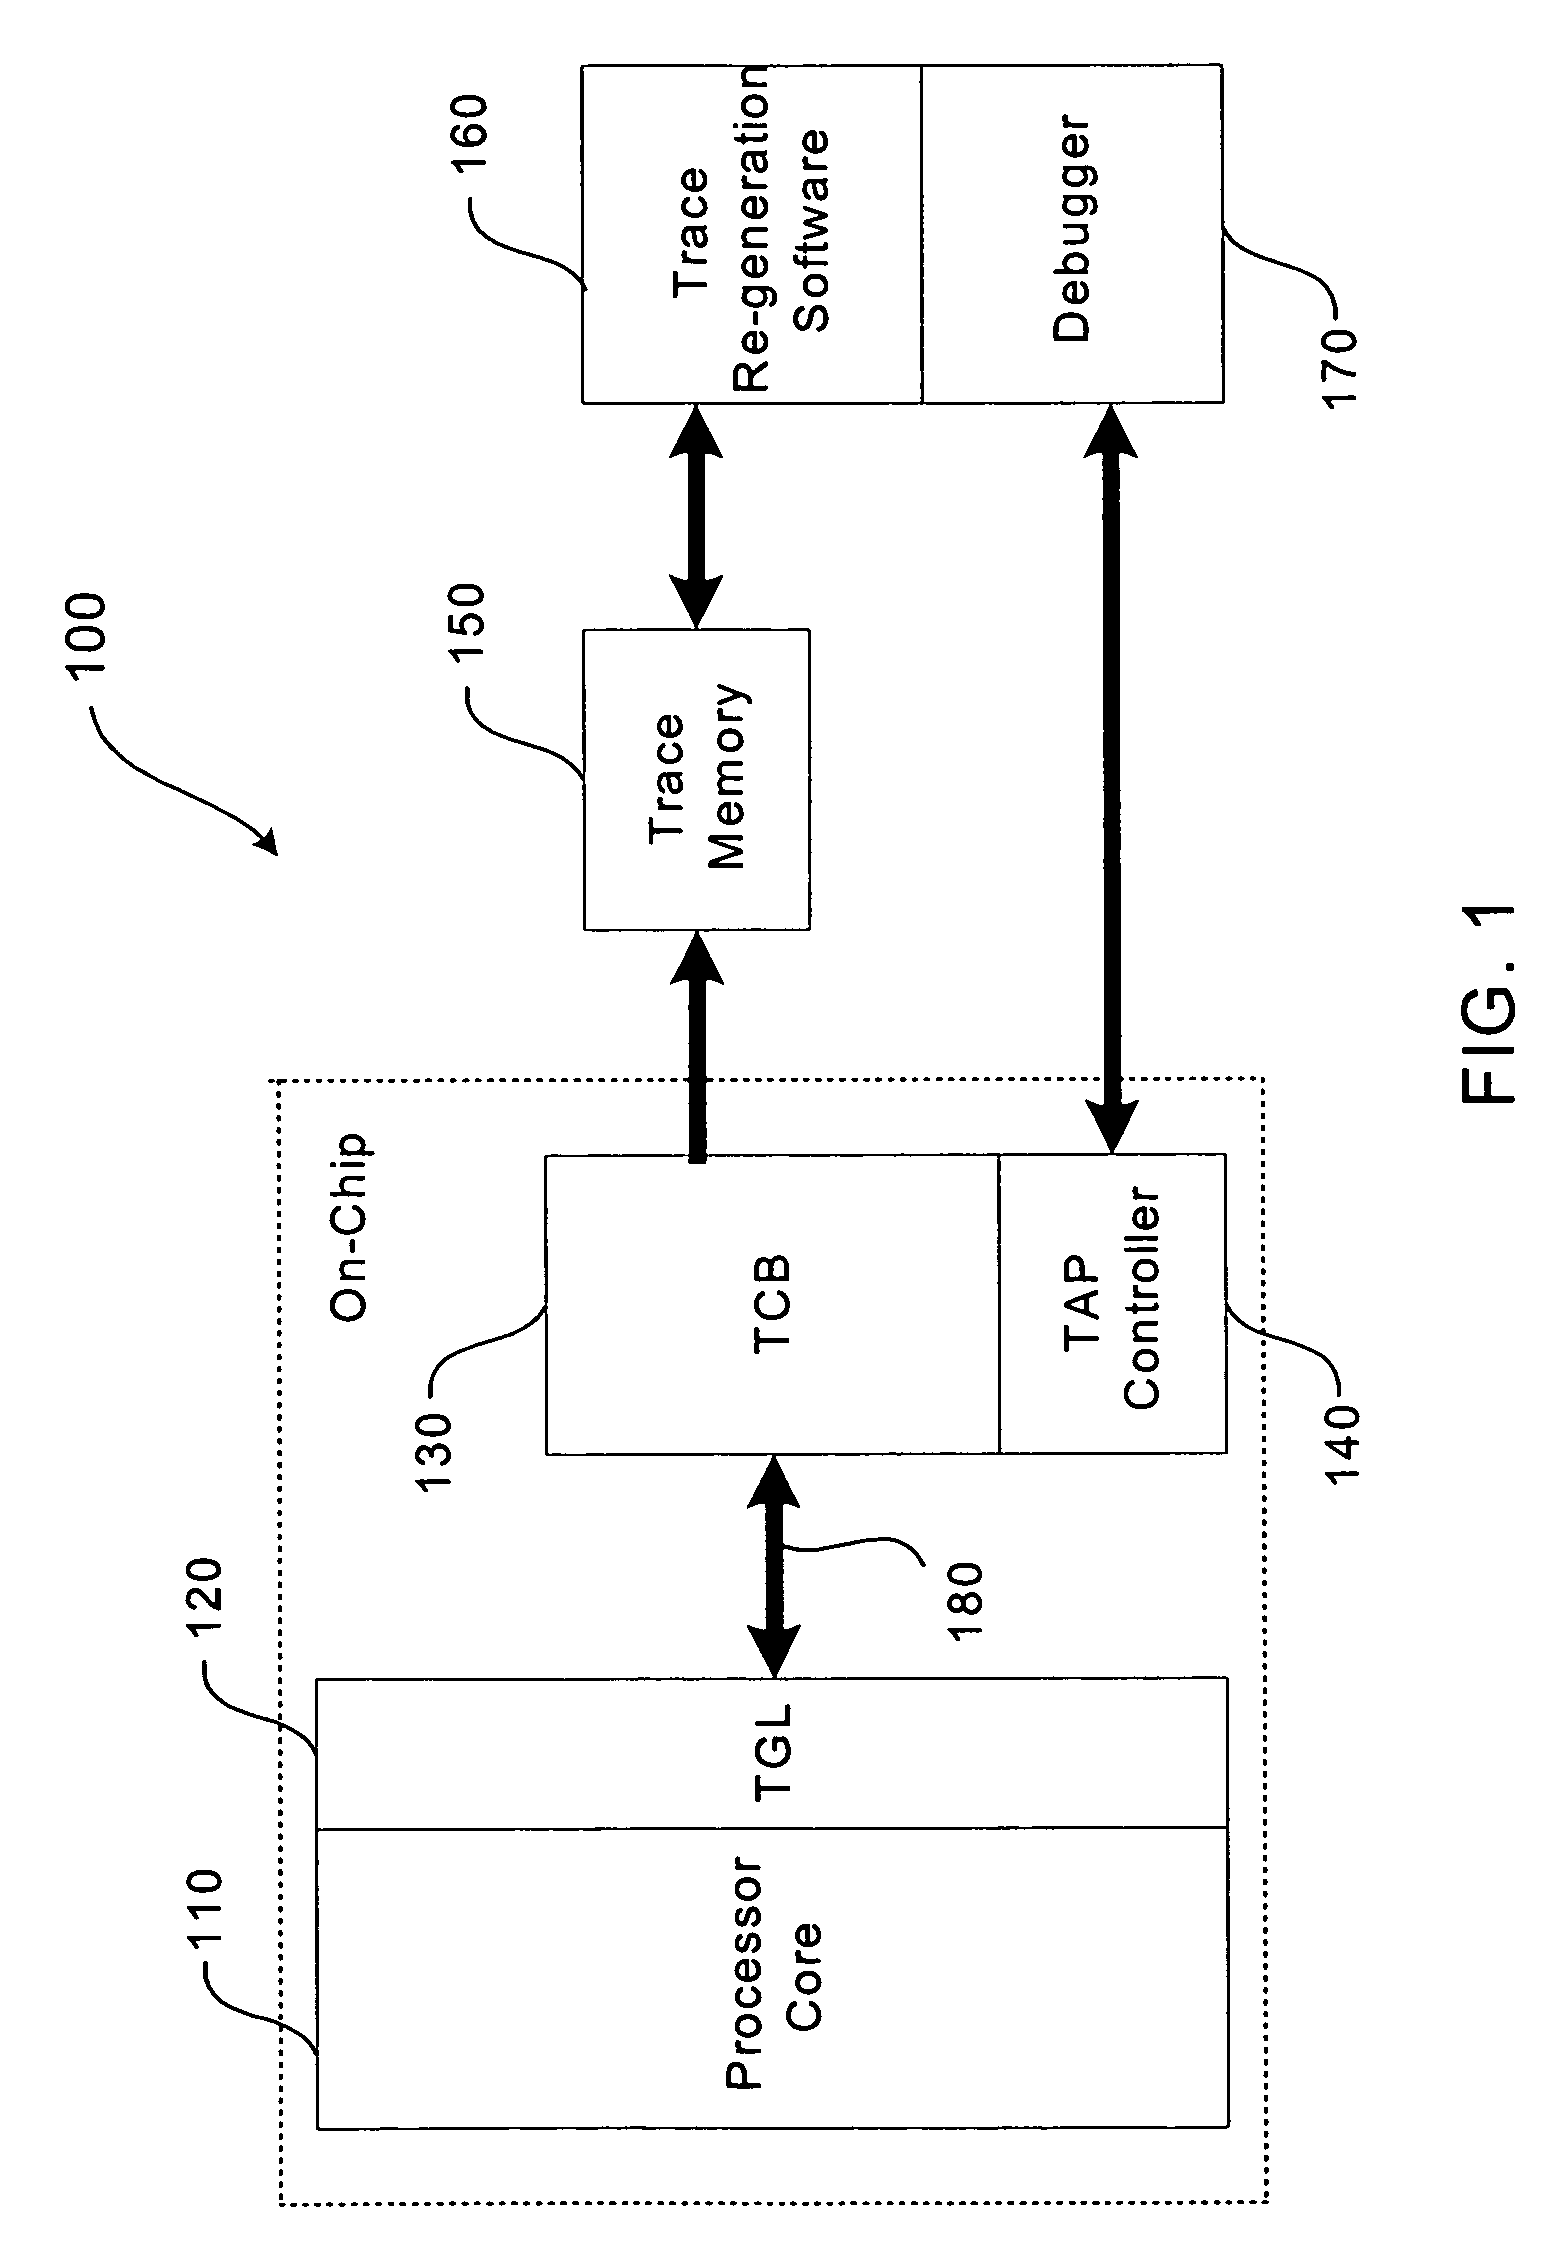 Trace control block implementation and method